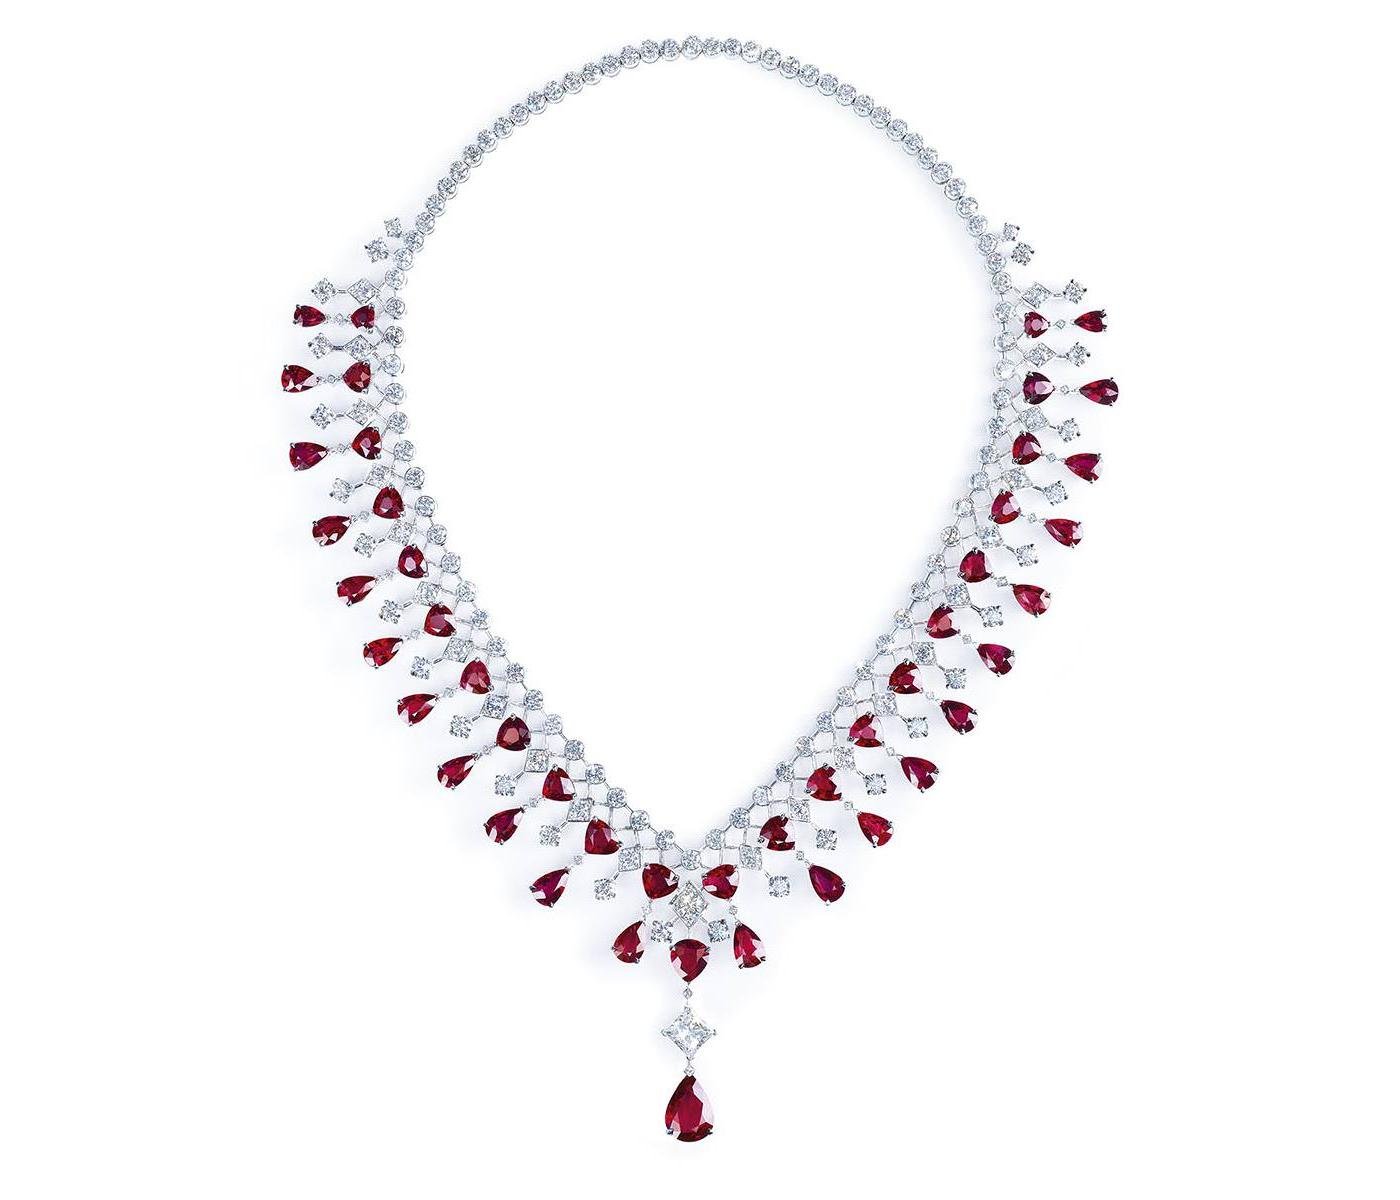 Necklace by Piaget